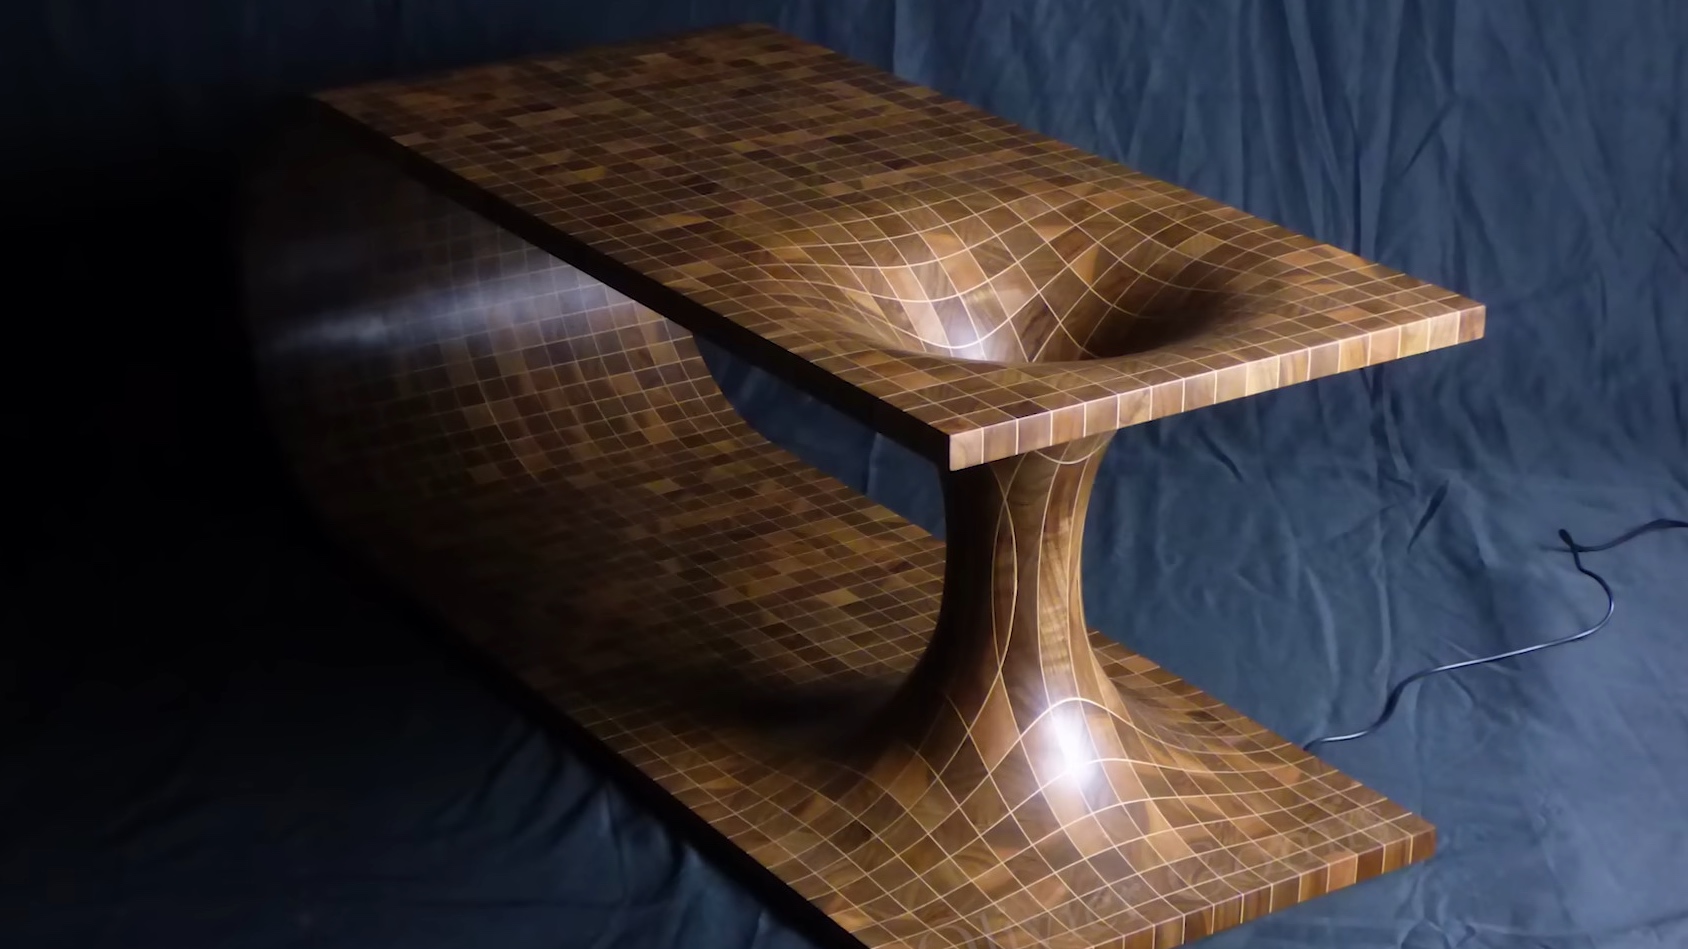 Wormhole Coffee Table Takes Woodworking to Another Dimension